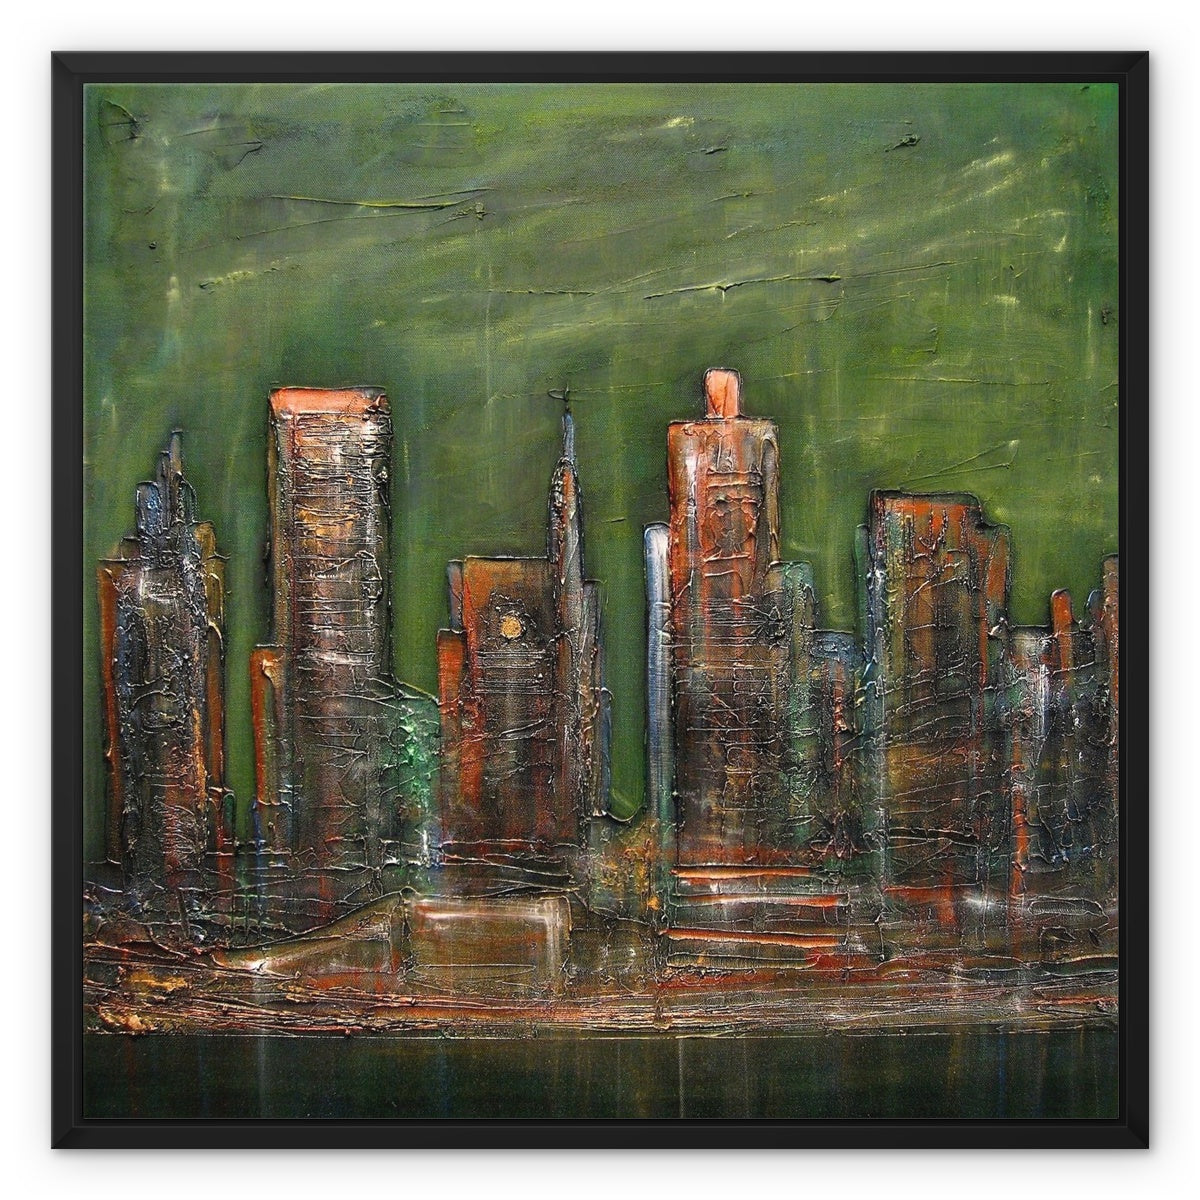 A Neon New York Painting | Framed Canvas From Scotland-Floating Framed Canvas Prints-World Art Gallery-24"x24"-Black Frame-Paintings, Prints, Homeware, Art Gifts From Scotland By Scottish Artist Kevin Hunter